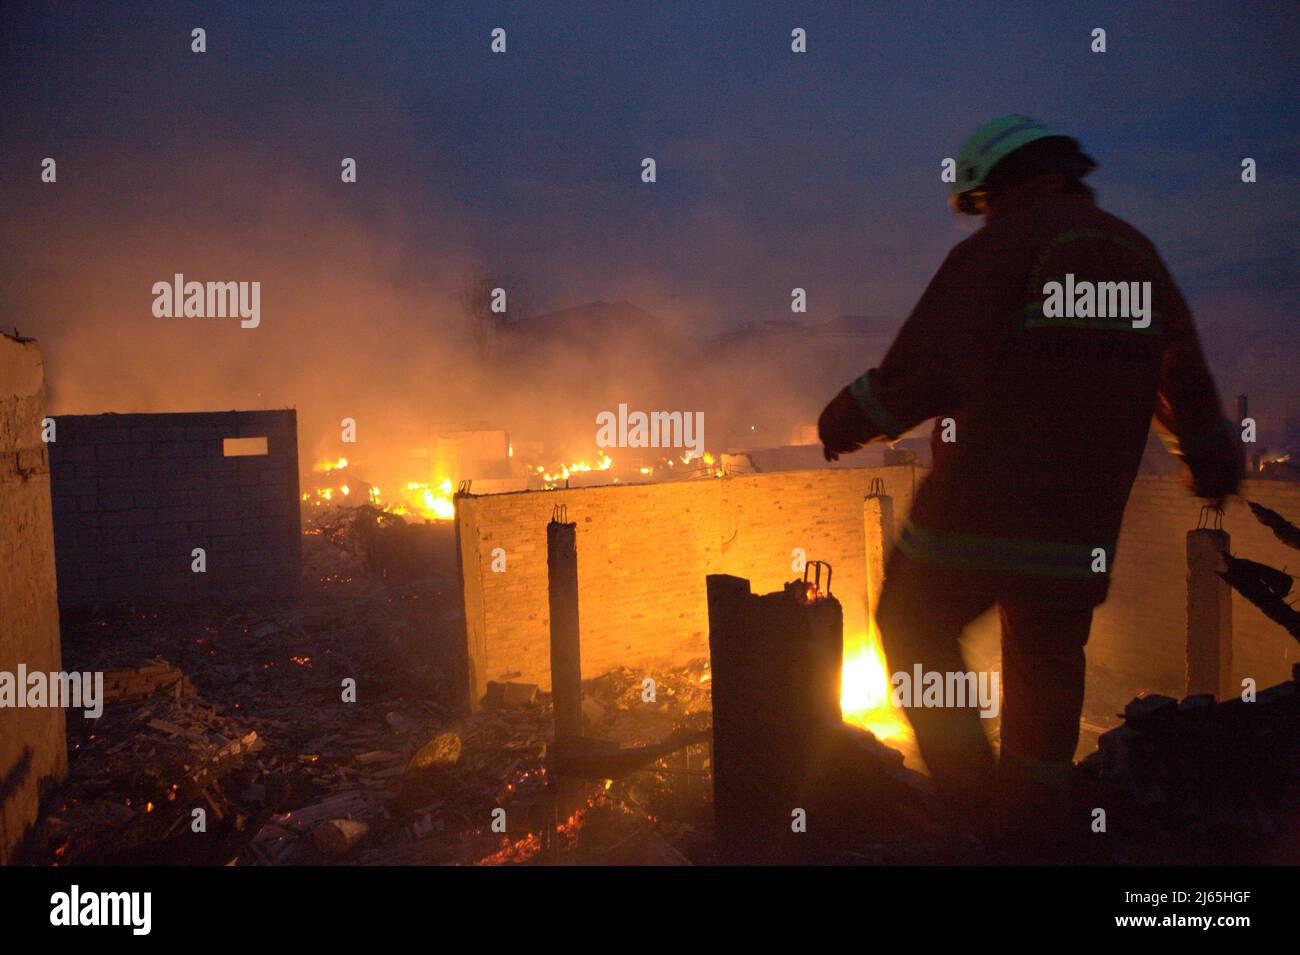 A firefighter walking toward the ruins and debris after a fire accident burned down hundreds of houses in a dense neighborhood in Penjaringan, North Jakarta, Jakarta, Indonesia. Stock Photo